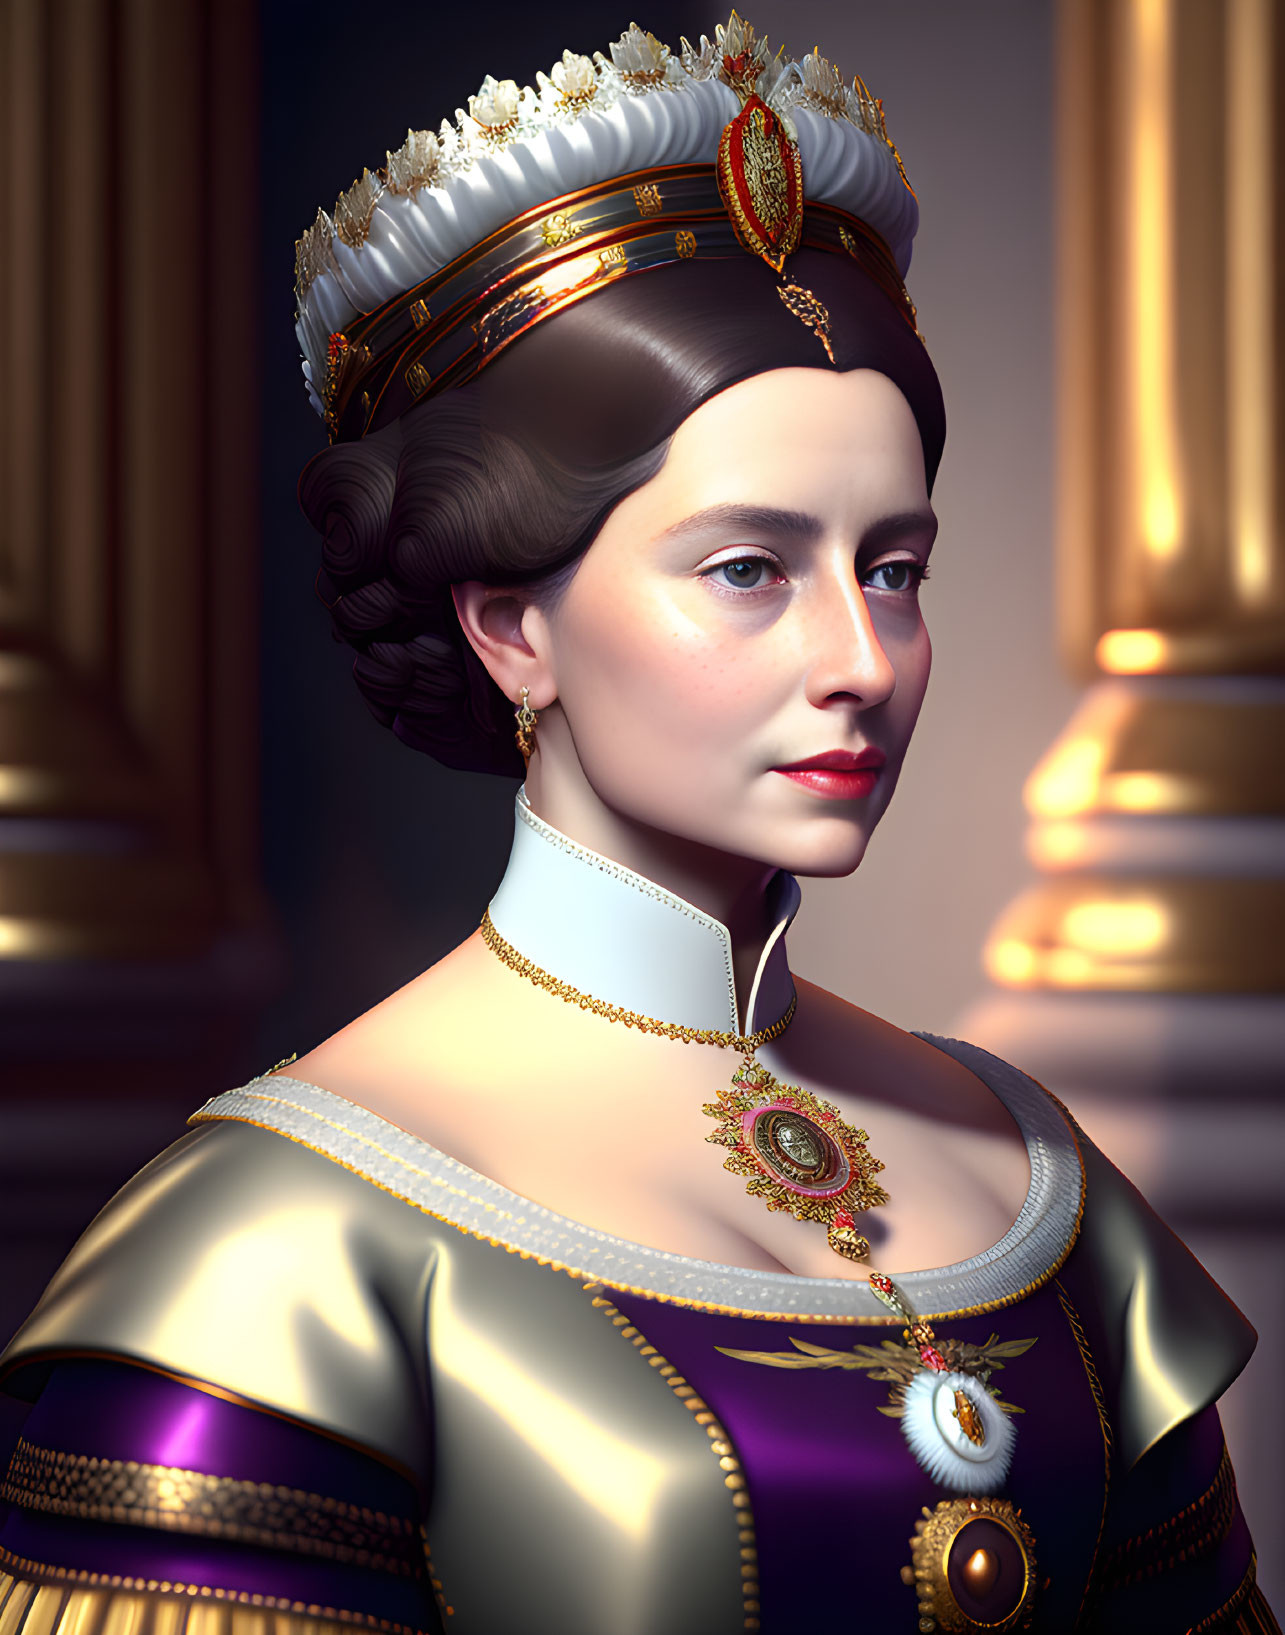 Digital portrait of woman styled as royalty with crown, pearl accessories, purple and gold gown, in grand